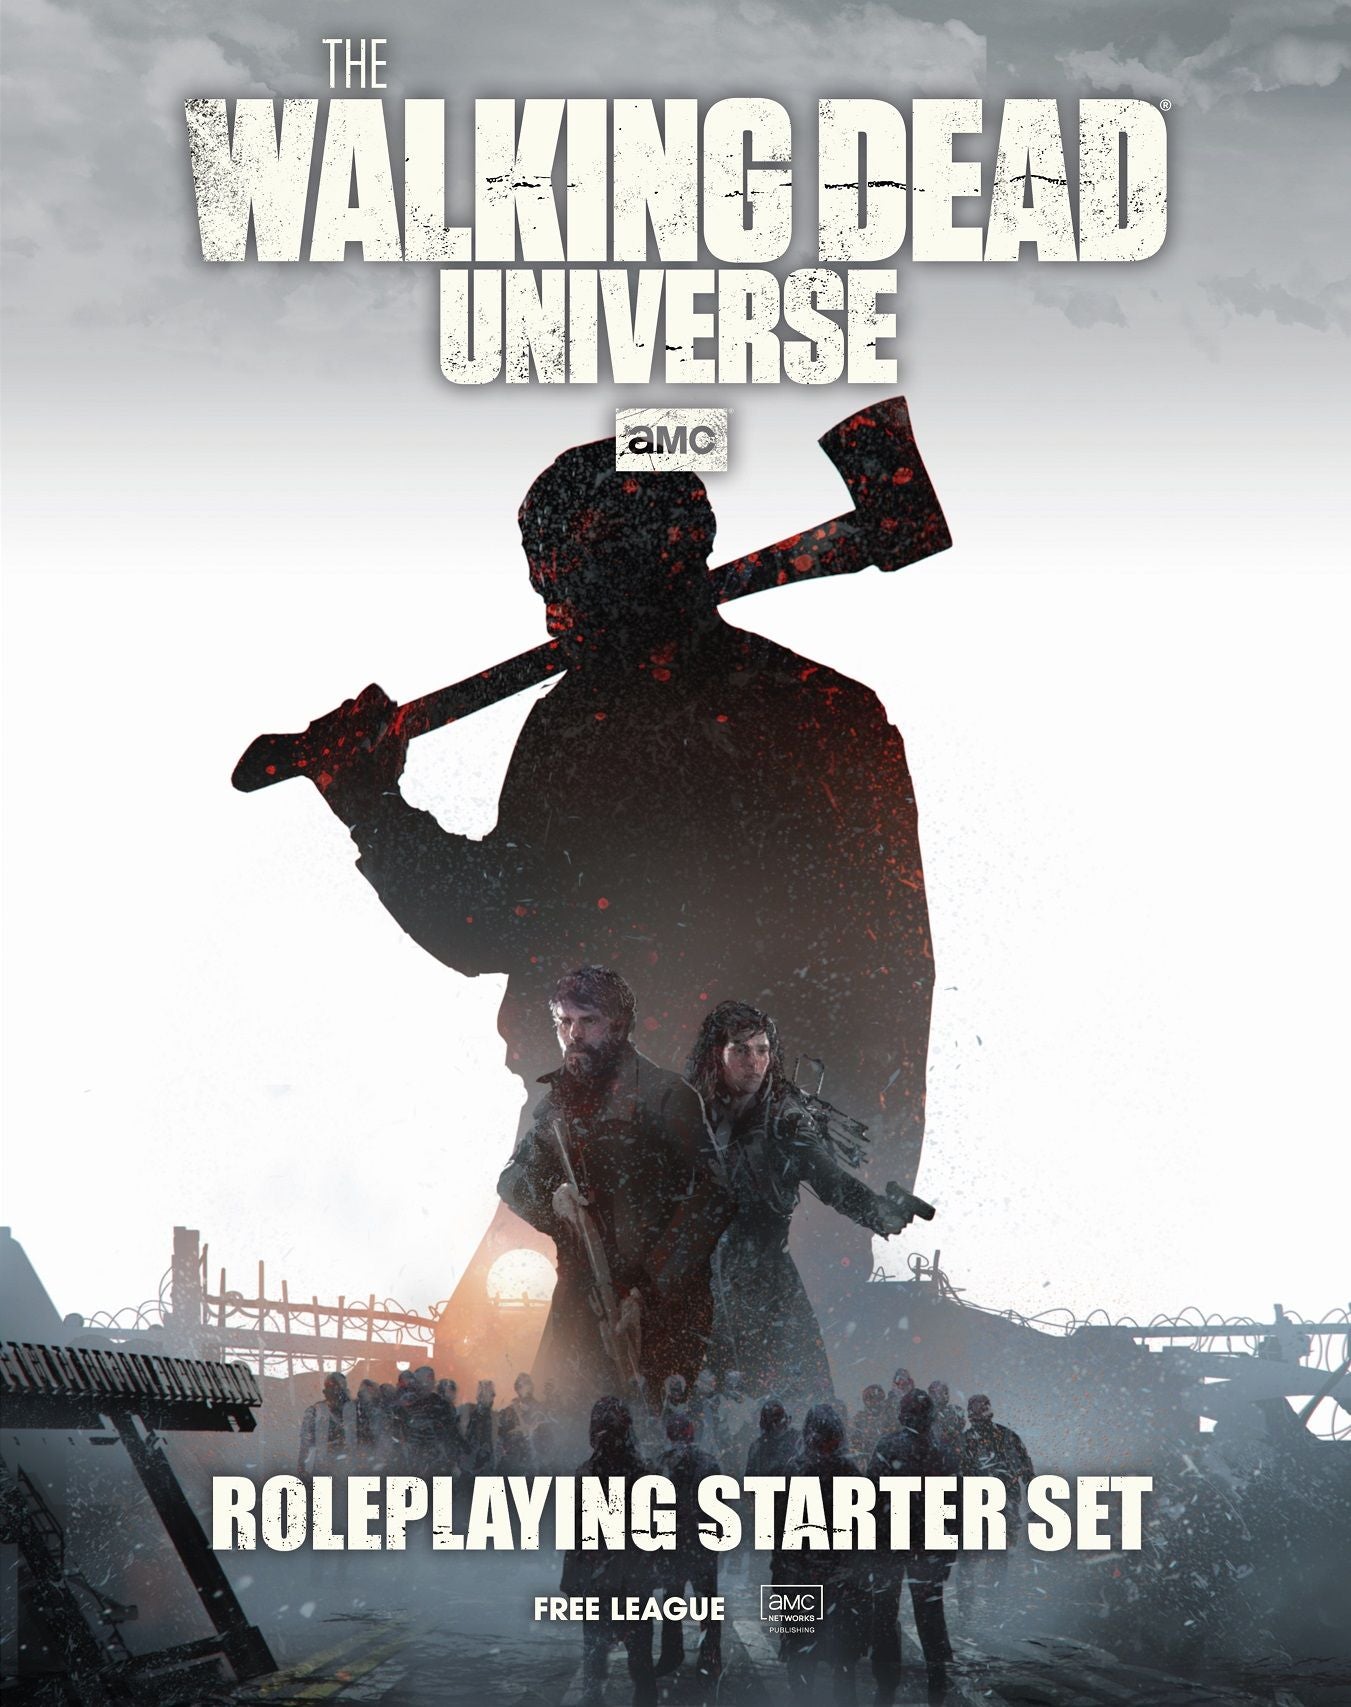 THE WALKING DEAD UNIVERSE RPG STARTER SET | The CG Realm